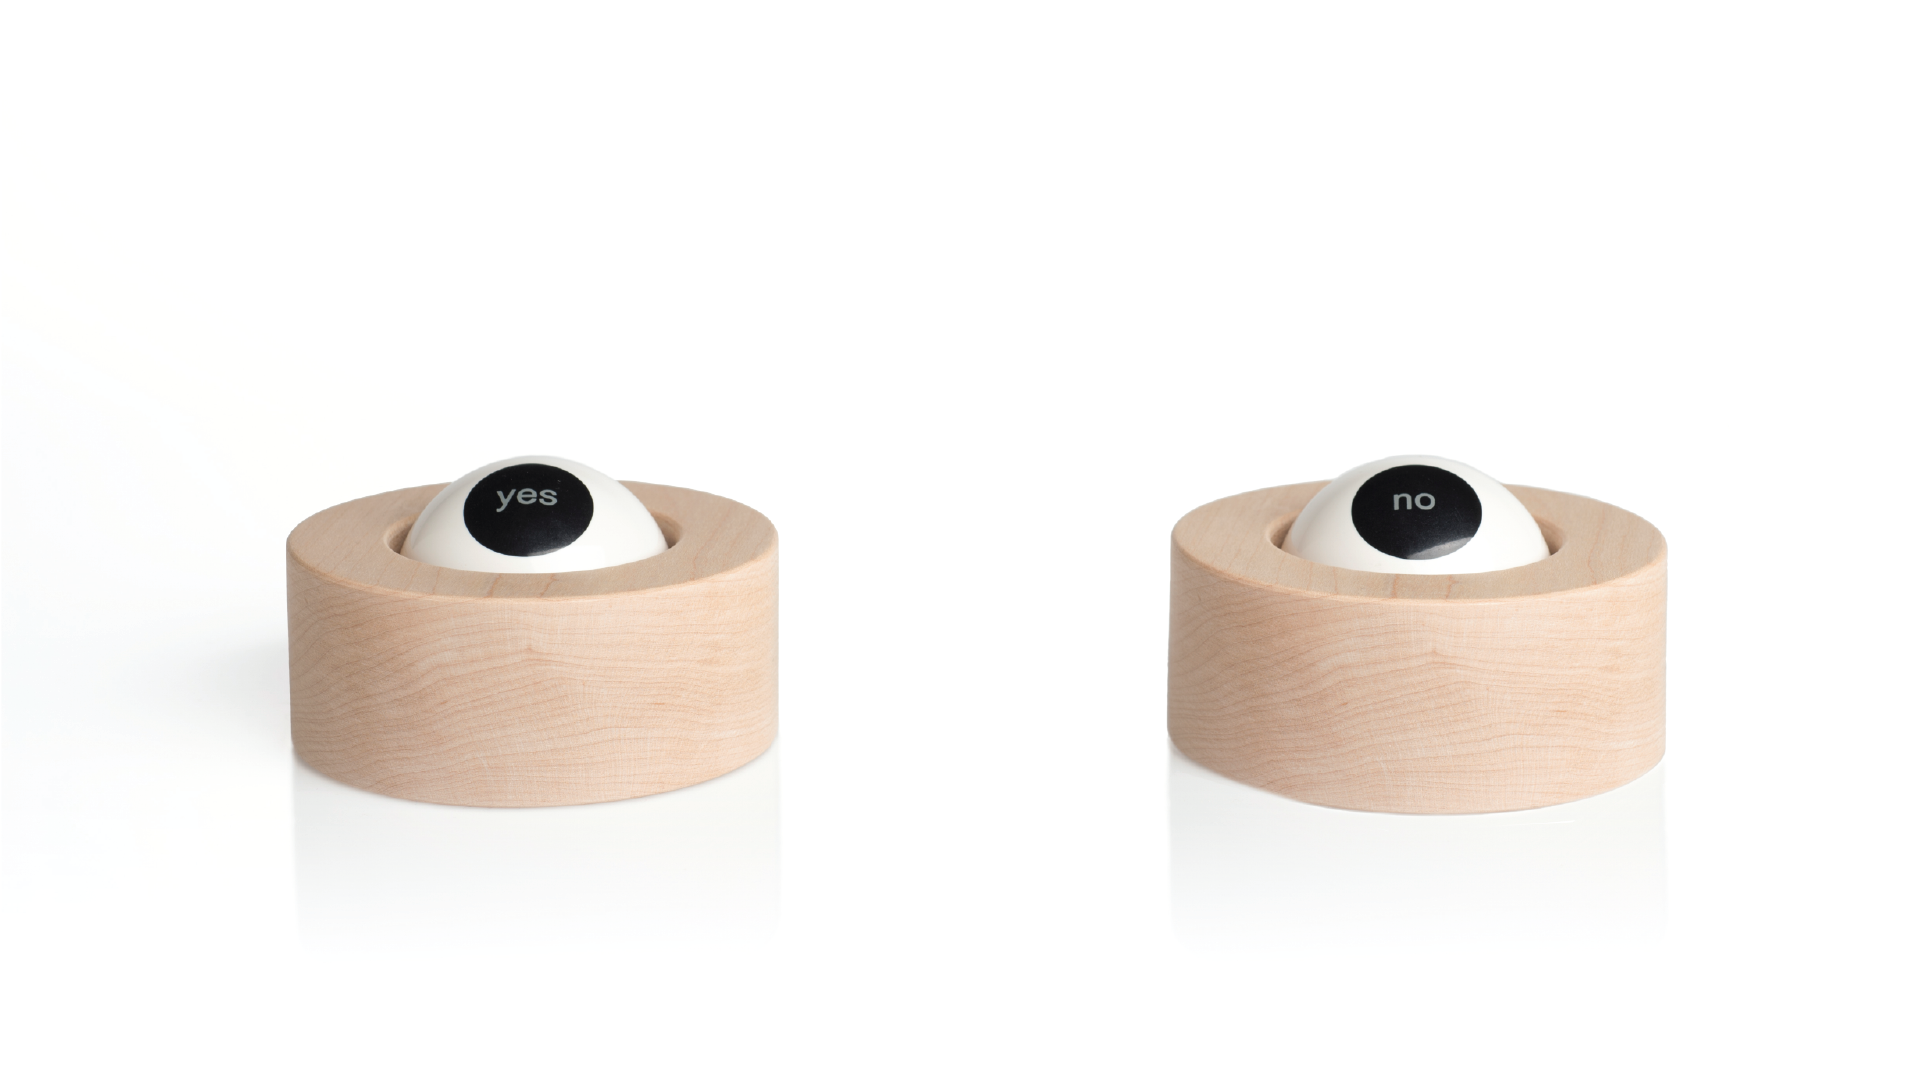 Two wooden blocks in a cylindrical format with a sphere painted like a eye. Inside the iris, one sphere says yes and the second one says no.